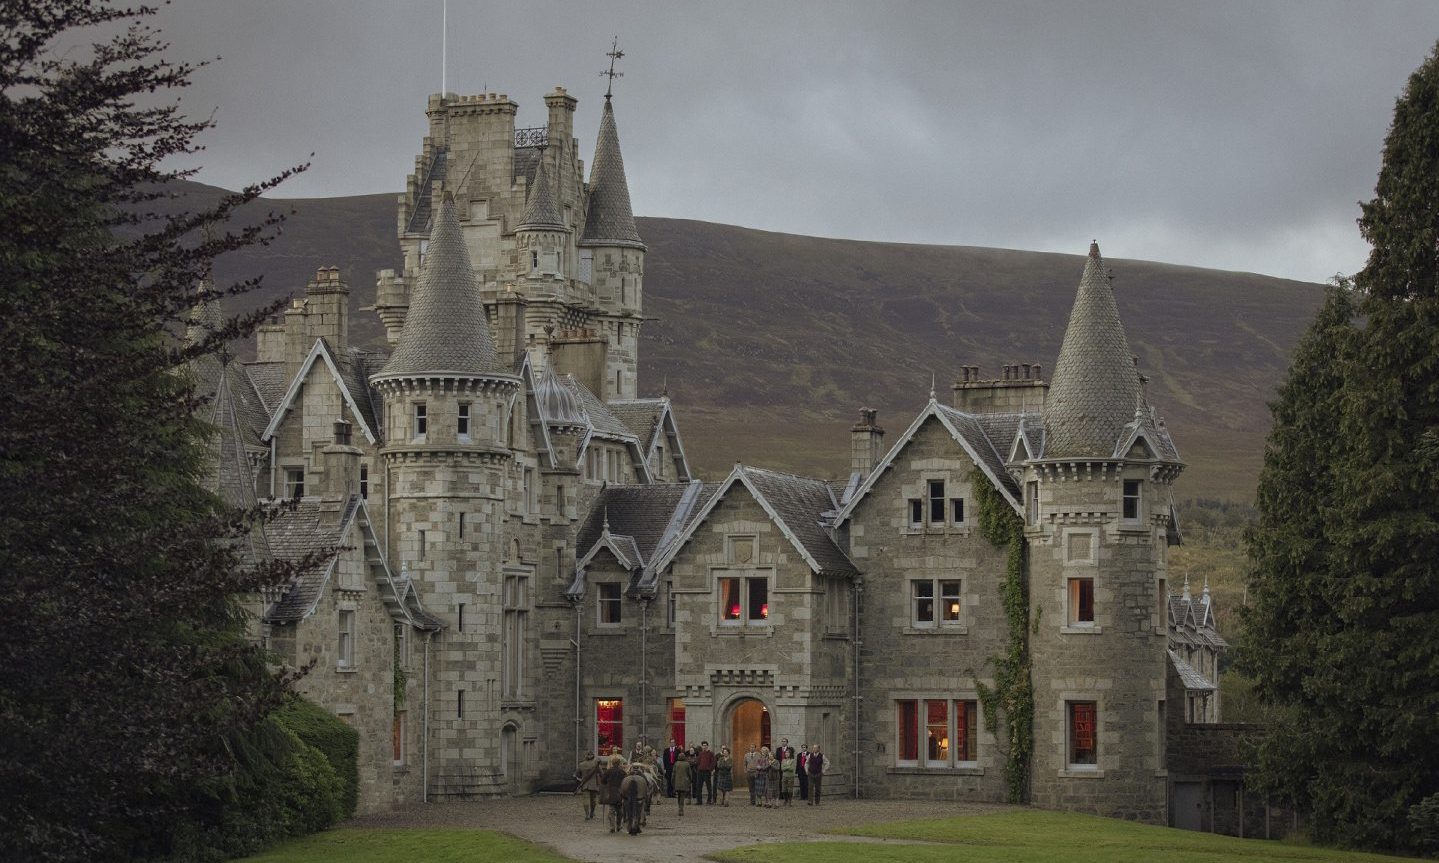 The grand building used as Balmoral Castle in The Crown